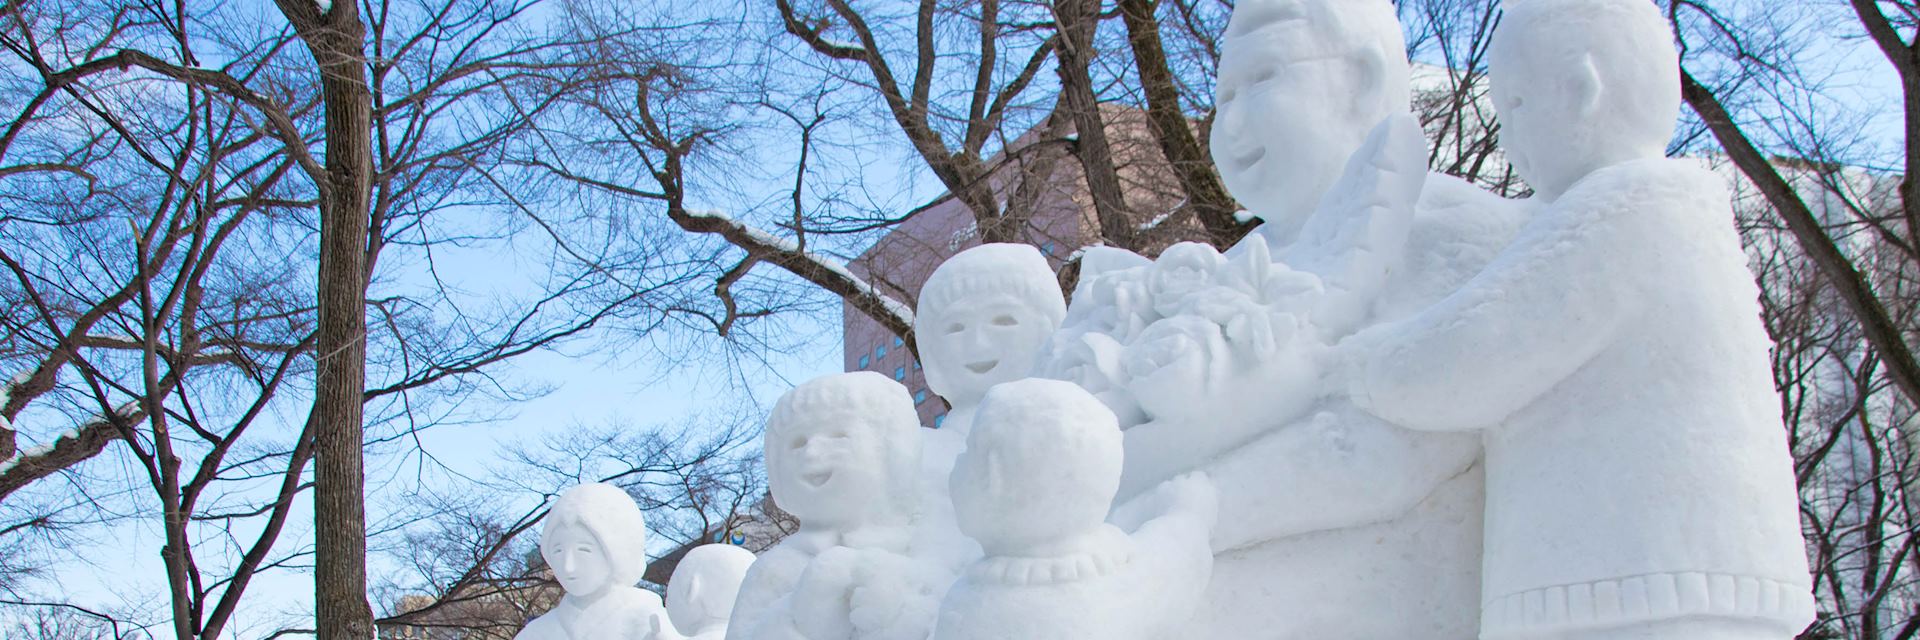 Ice sculptures at Sapporo Snow Festival